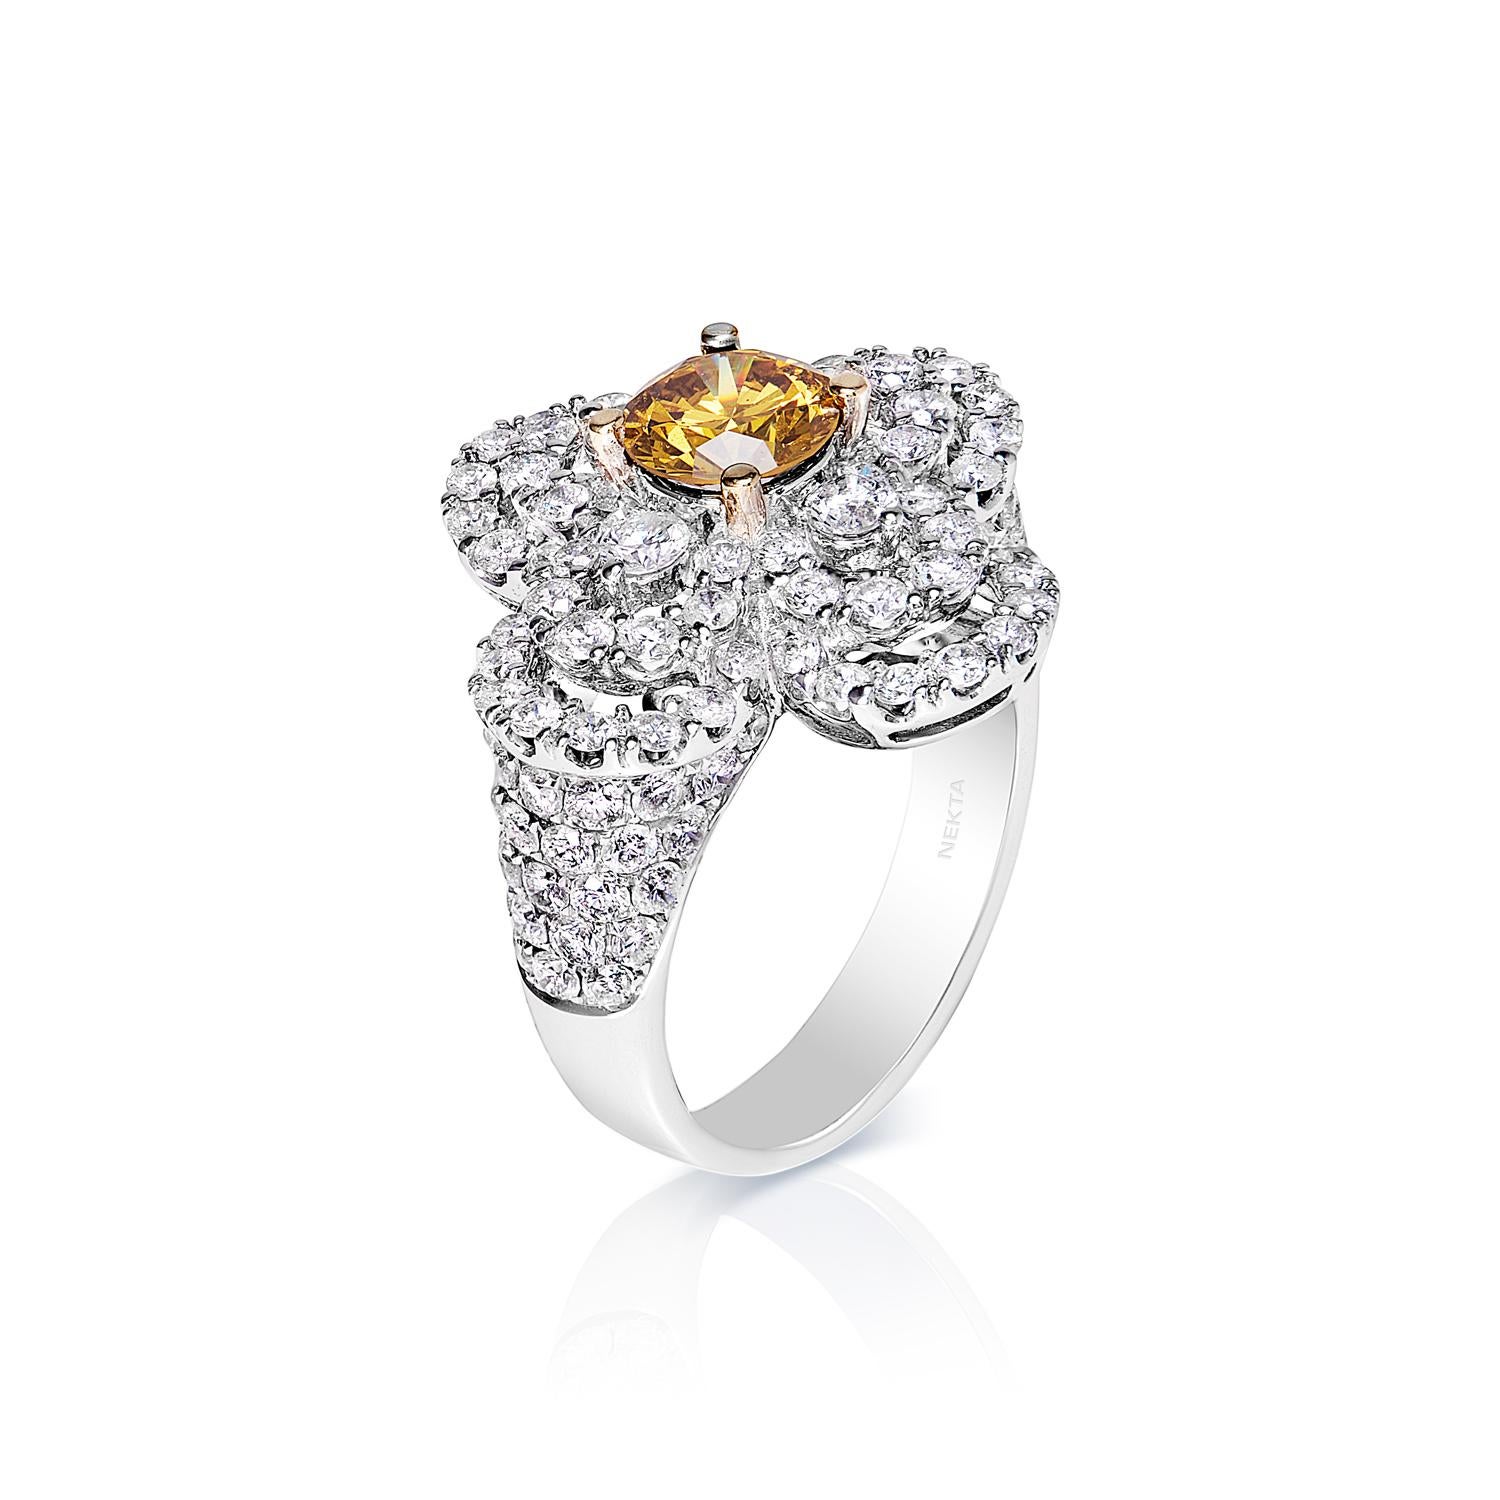 Round Cut 4 Carat Round Brilliant Diamond Engagement Ring Certified Y For Sale